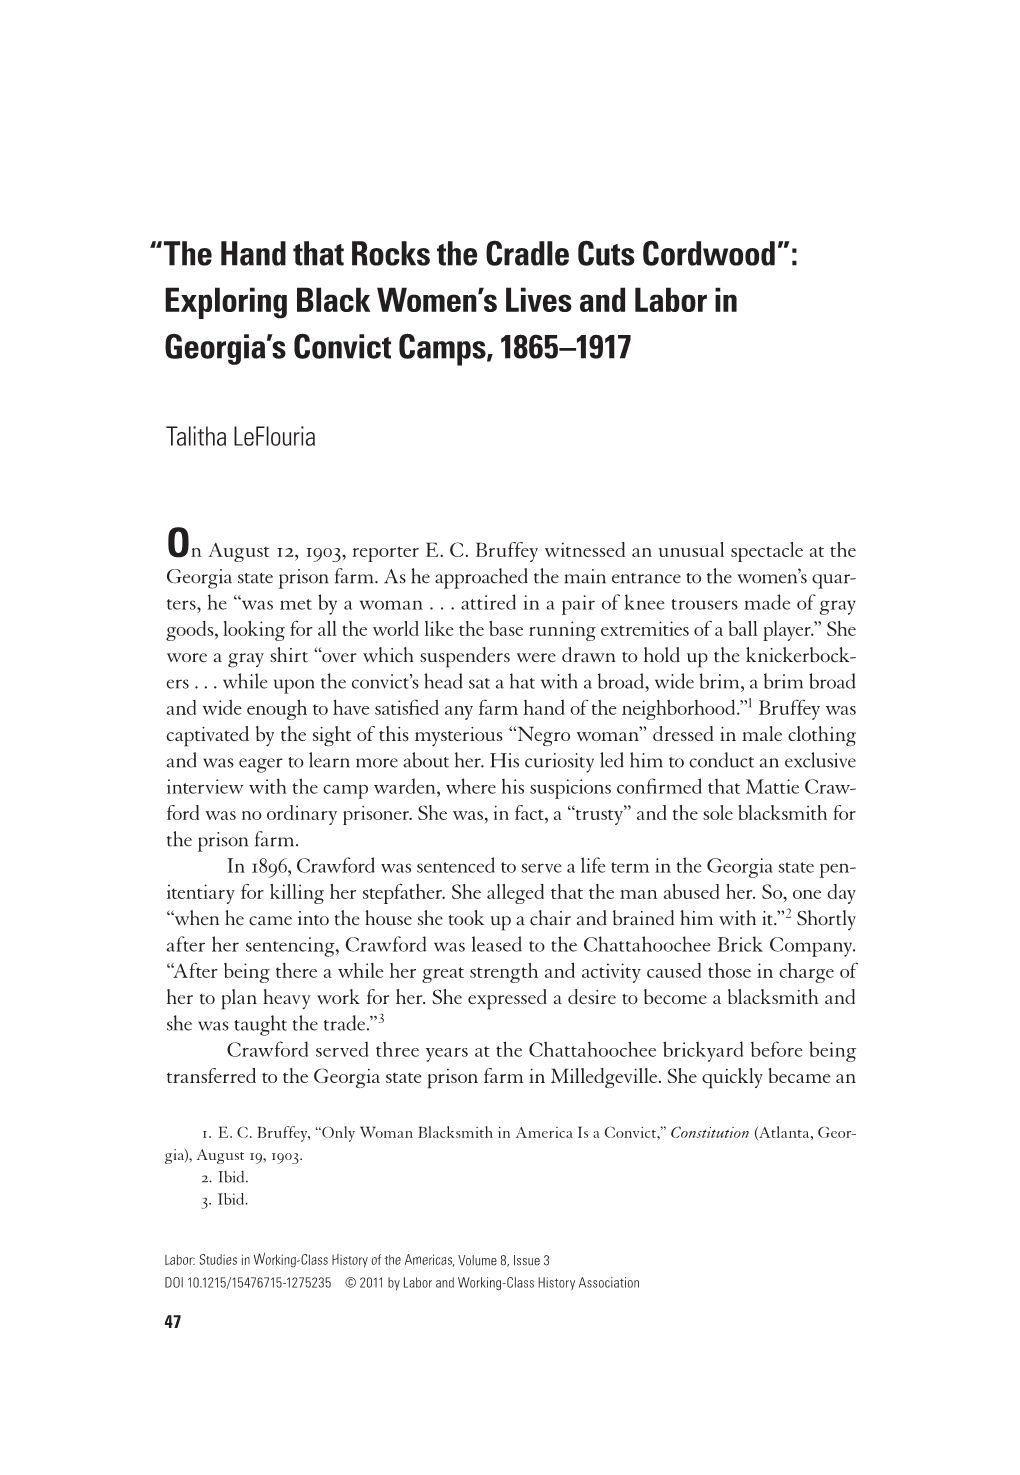 The Hand That Rocks the Cradle Cuts Cordwood”: Exploring Black Women’S Lives and Labor in Georgia’S Convict Camps, 1865 –1917